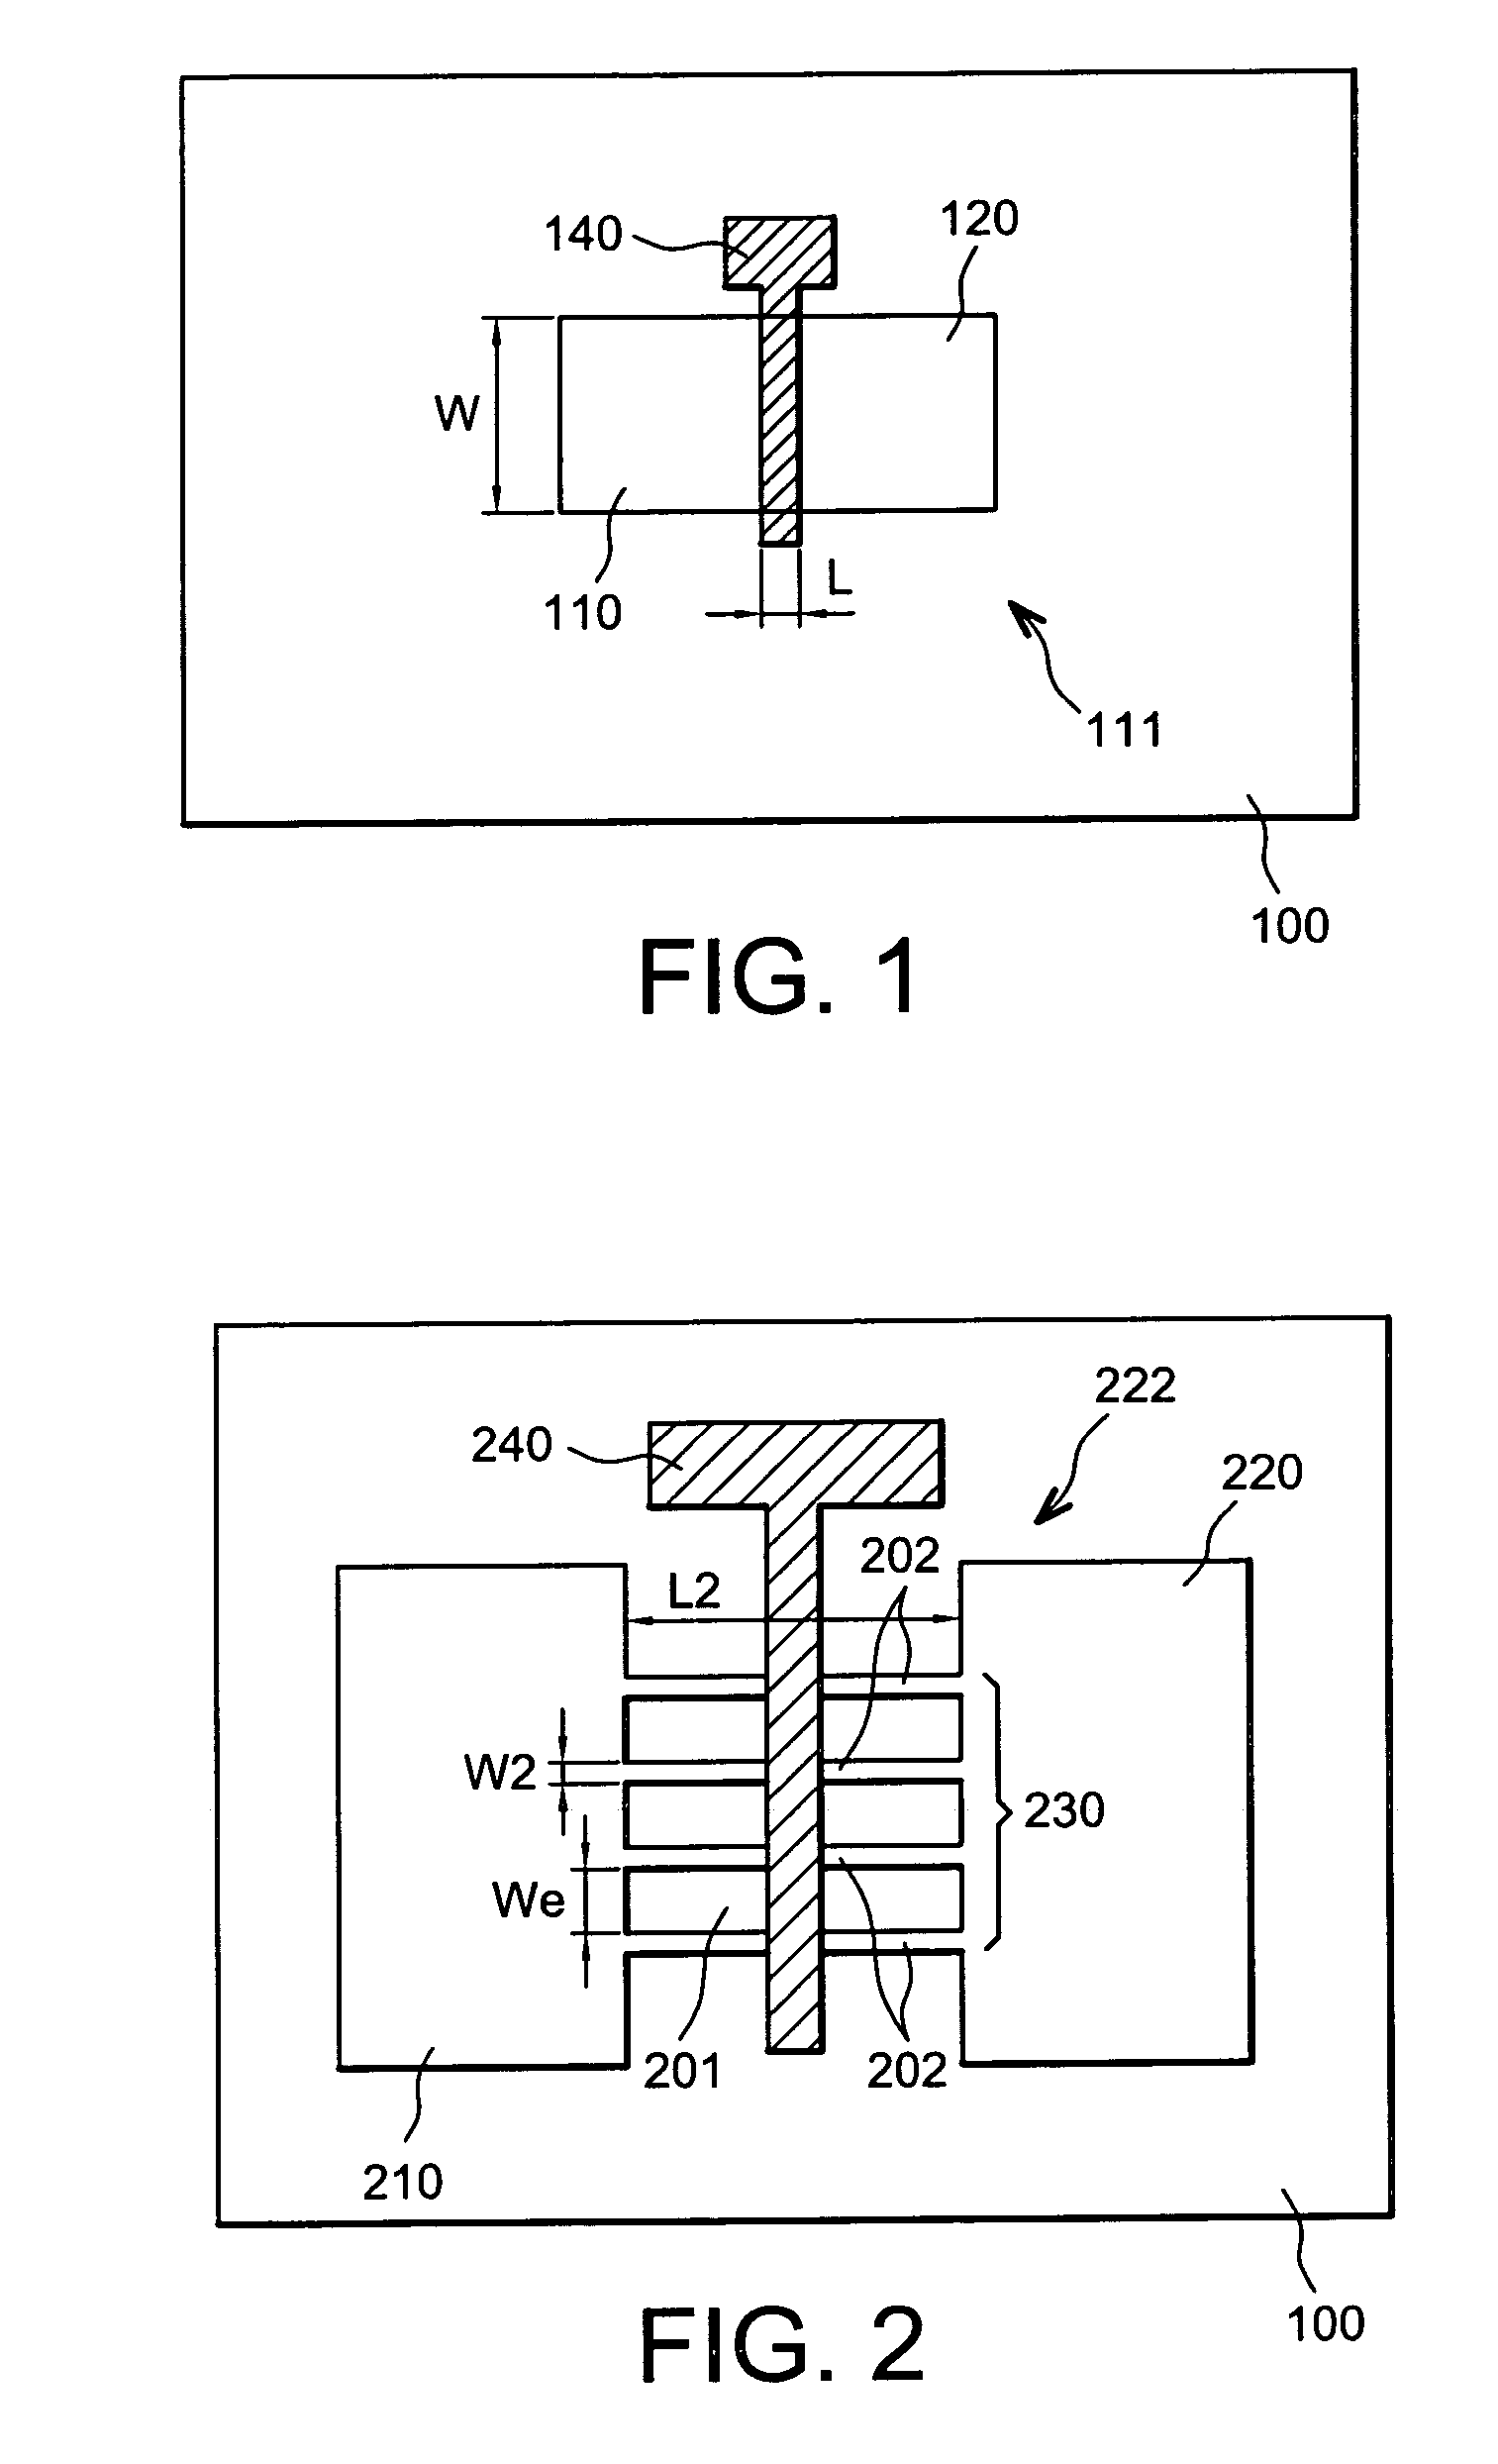 Field-effect microelectronic device, capable of forming one or several transistor channels